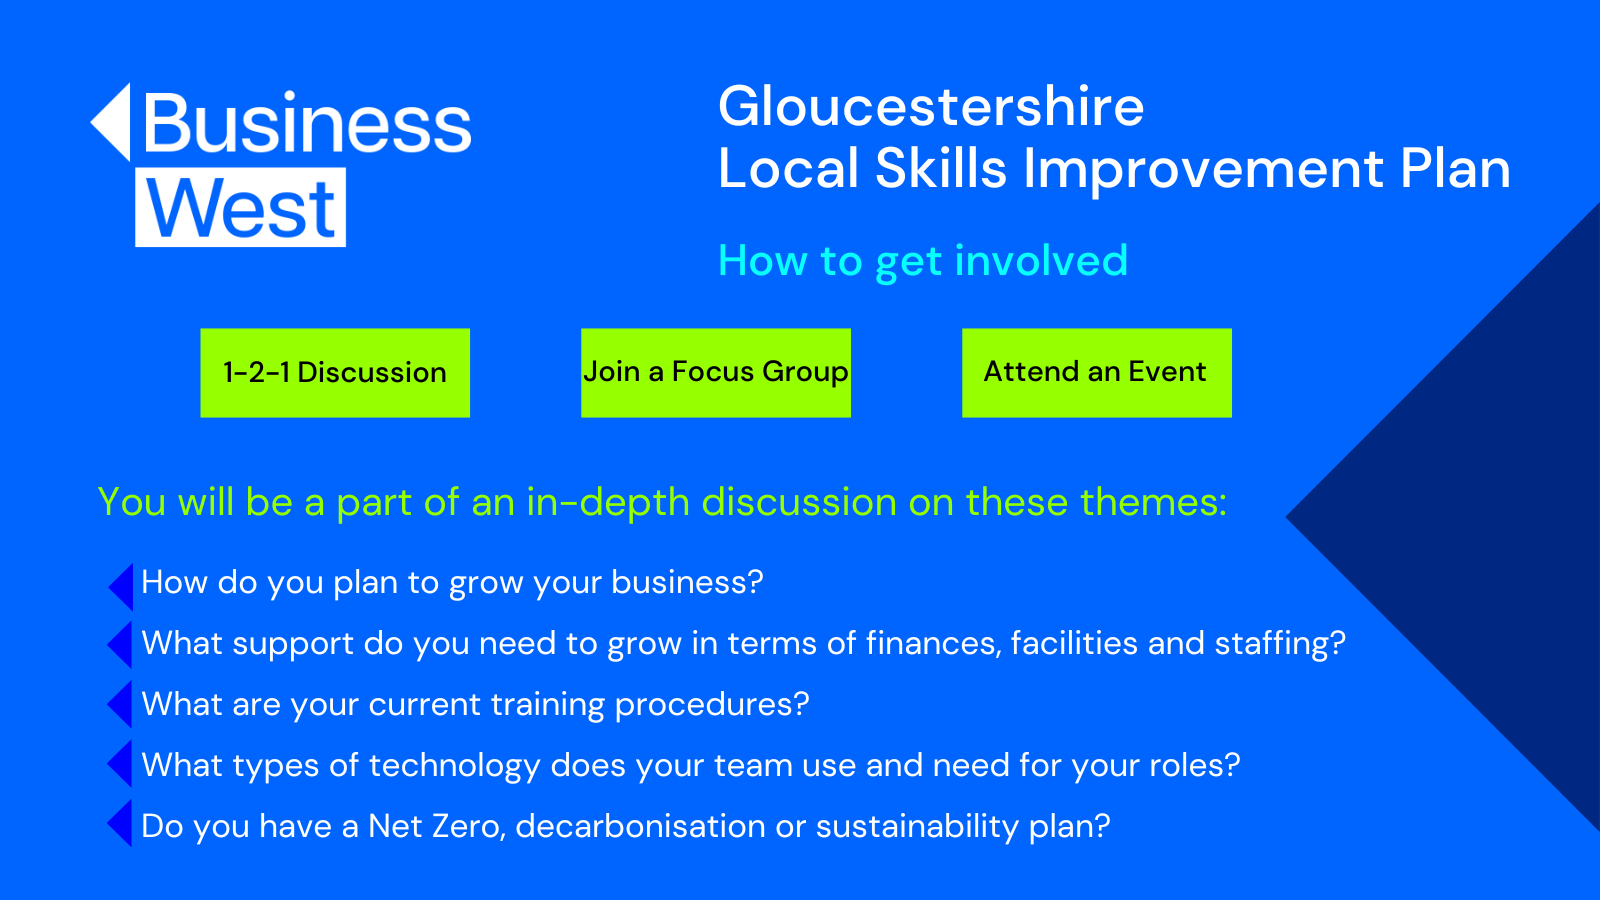 How to get involved with Gloucestershire LSIP